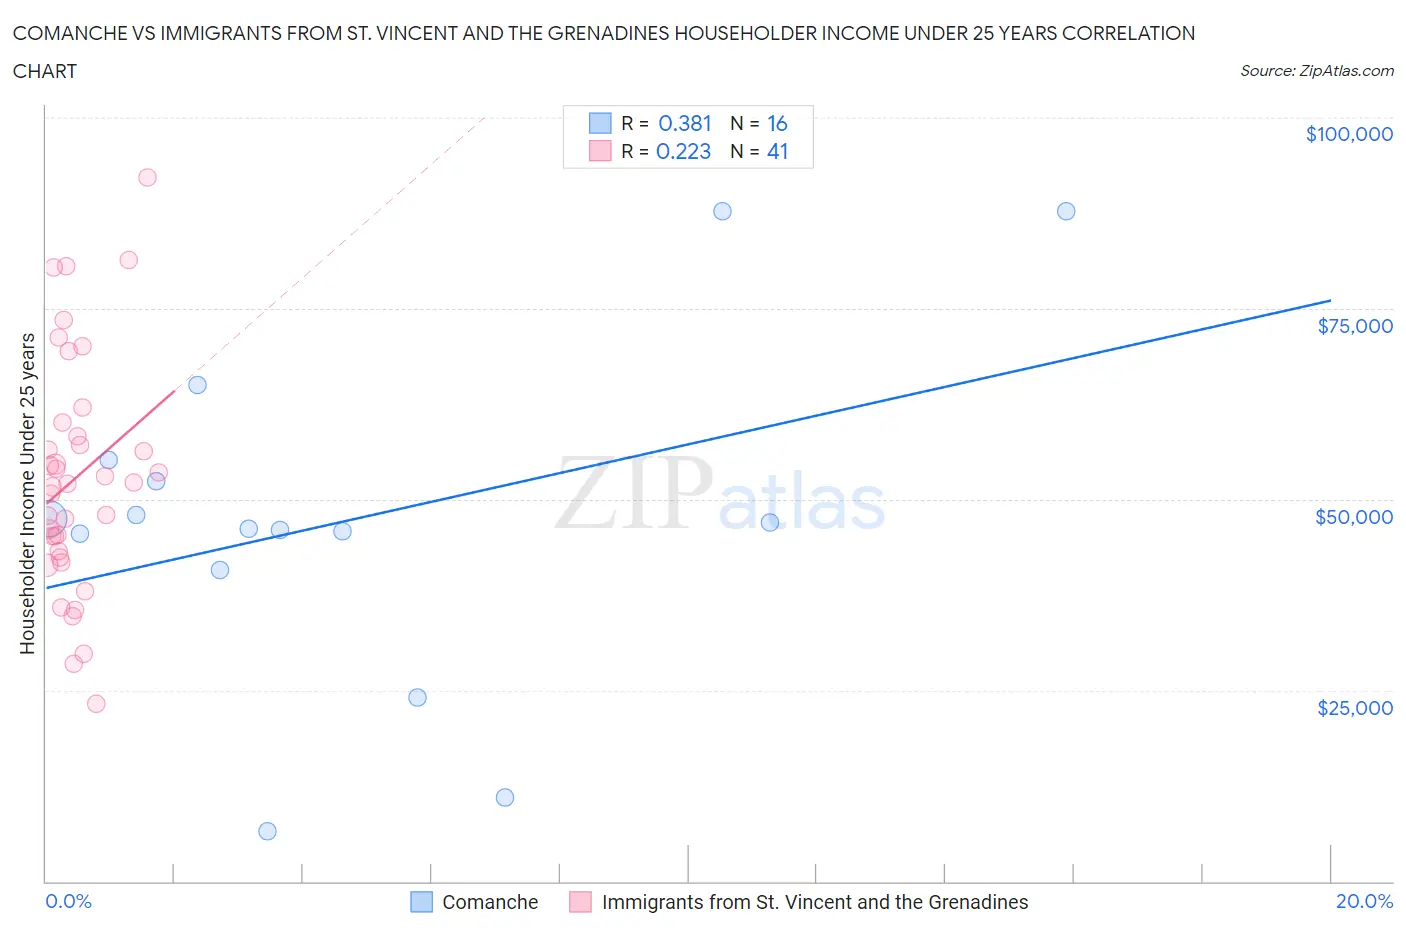 Comanche vs Immigrants from St. Vincent and the Grenadines Householder Income Under 25 years